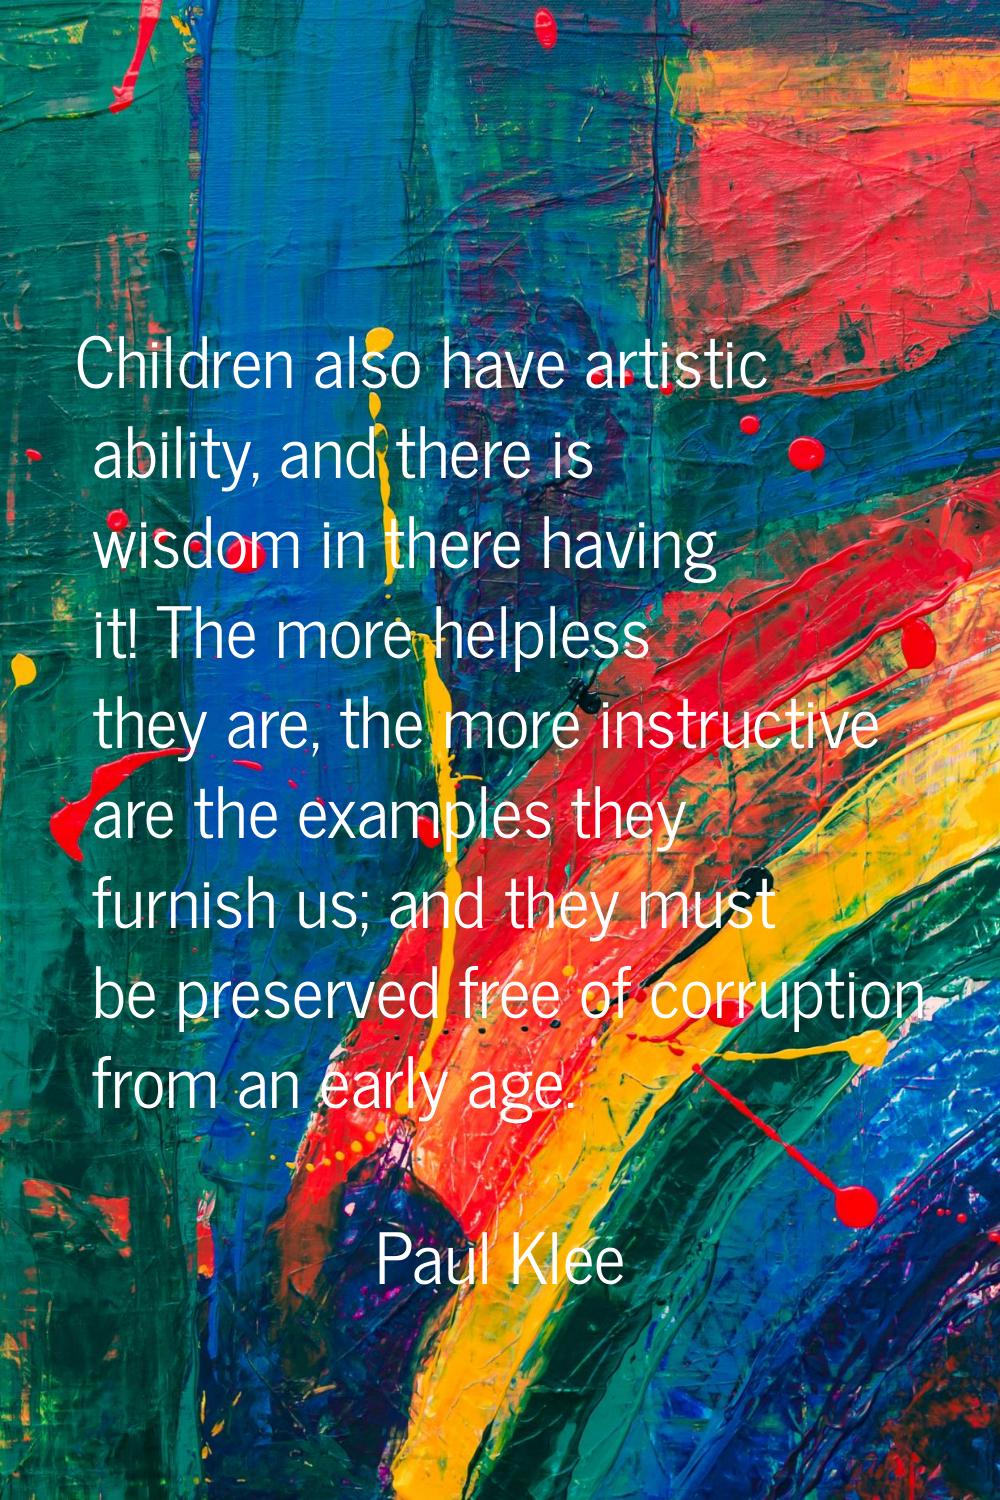 Children also have artistic ability, and there is wisdom in there having it! The more helpless they